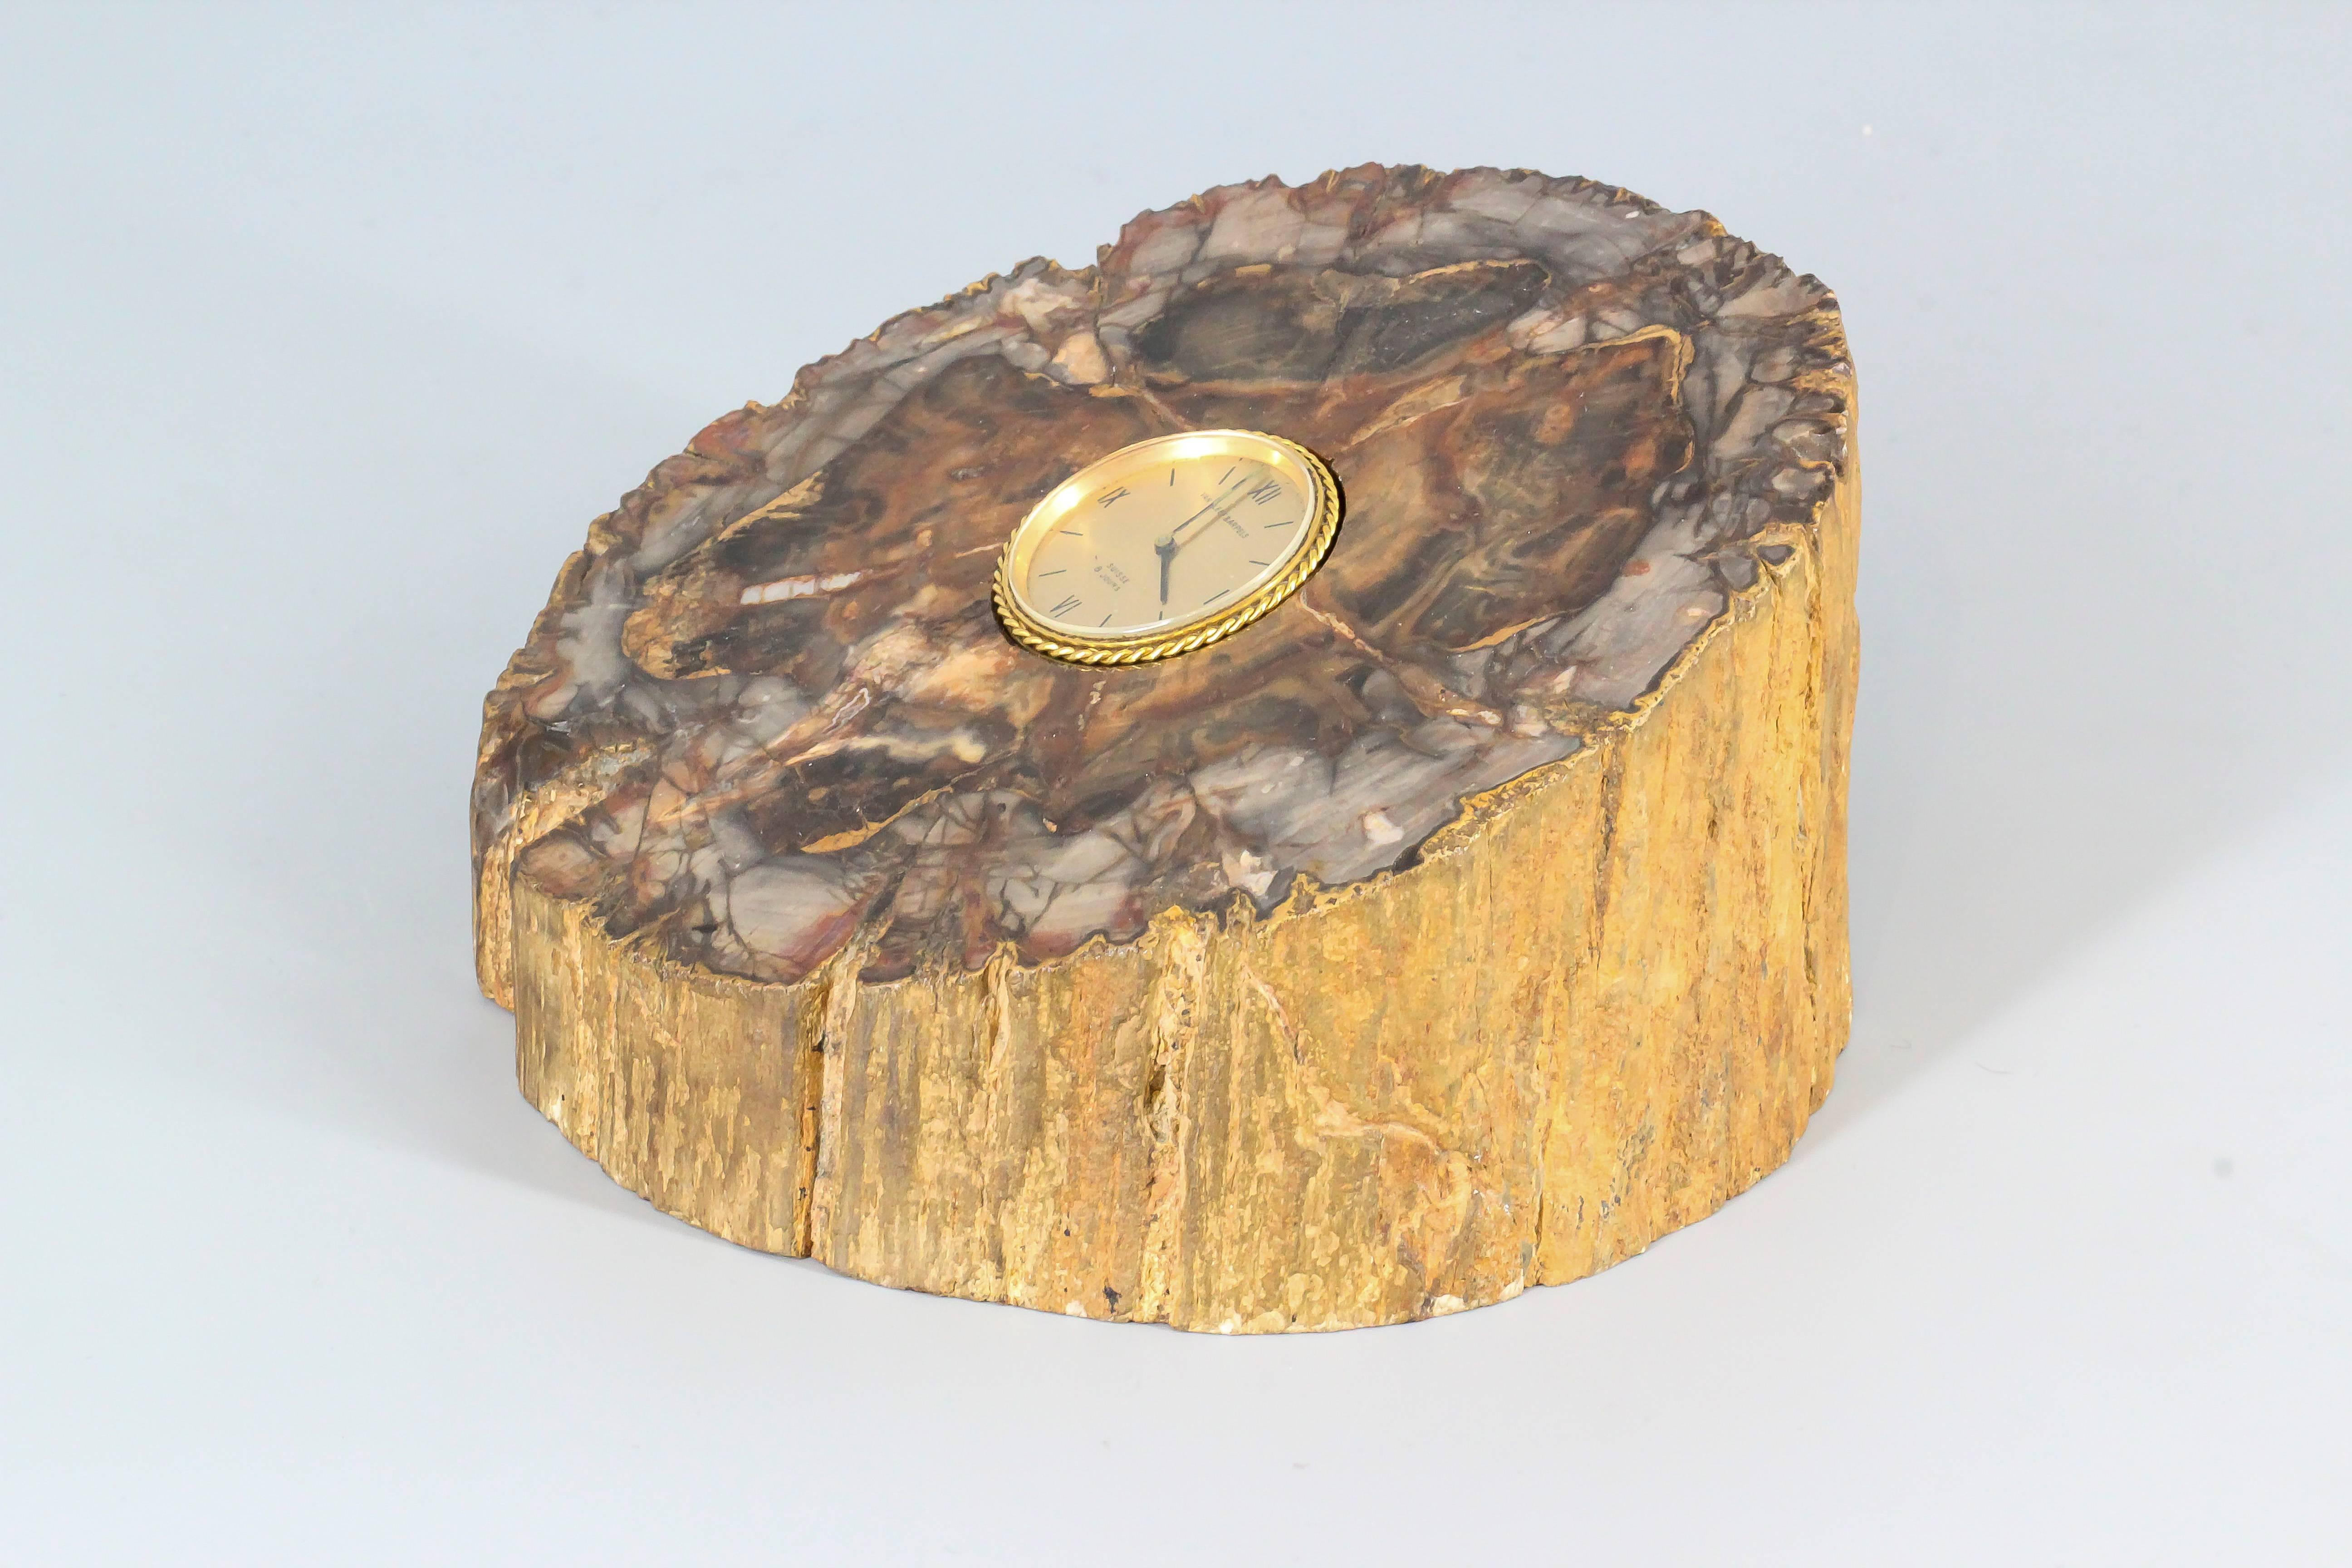 Rare and unusual 18K yellow gold desk clock by Van Cleef & Arpels set in petrified wood, circa 1970s. Mechanical watch movement. The watch itself can easily be removed from its base for easy winding.

Hallmarks: Van Cleef & Arpels, Suisse 8 Jours,